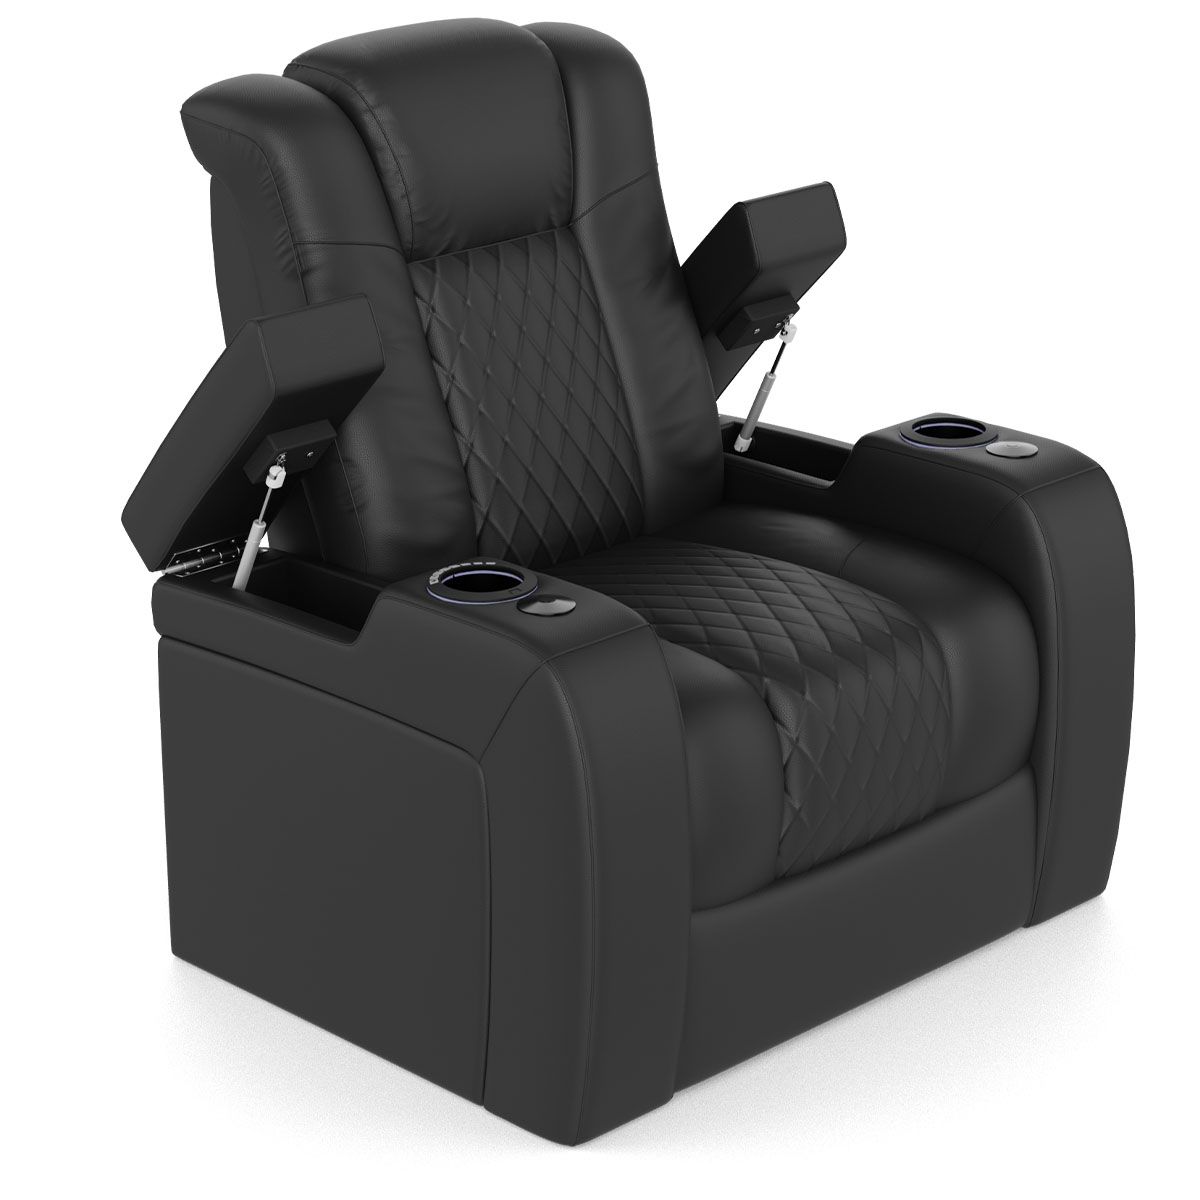 Audio Advice Revelation Home Theater Seating - left angled front view of 2 arm chair with arm rest up to show storage